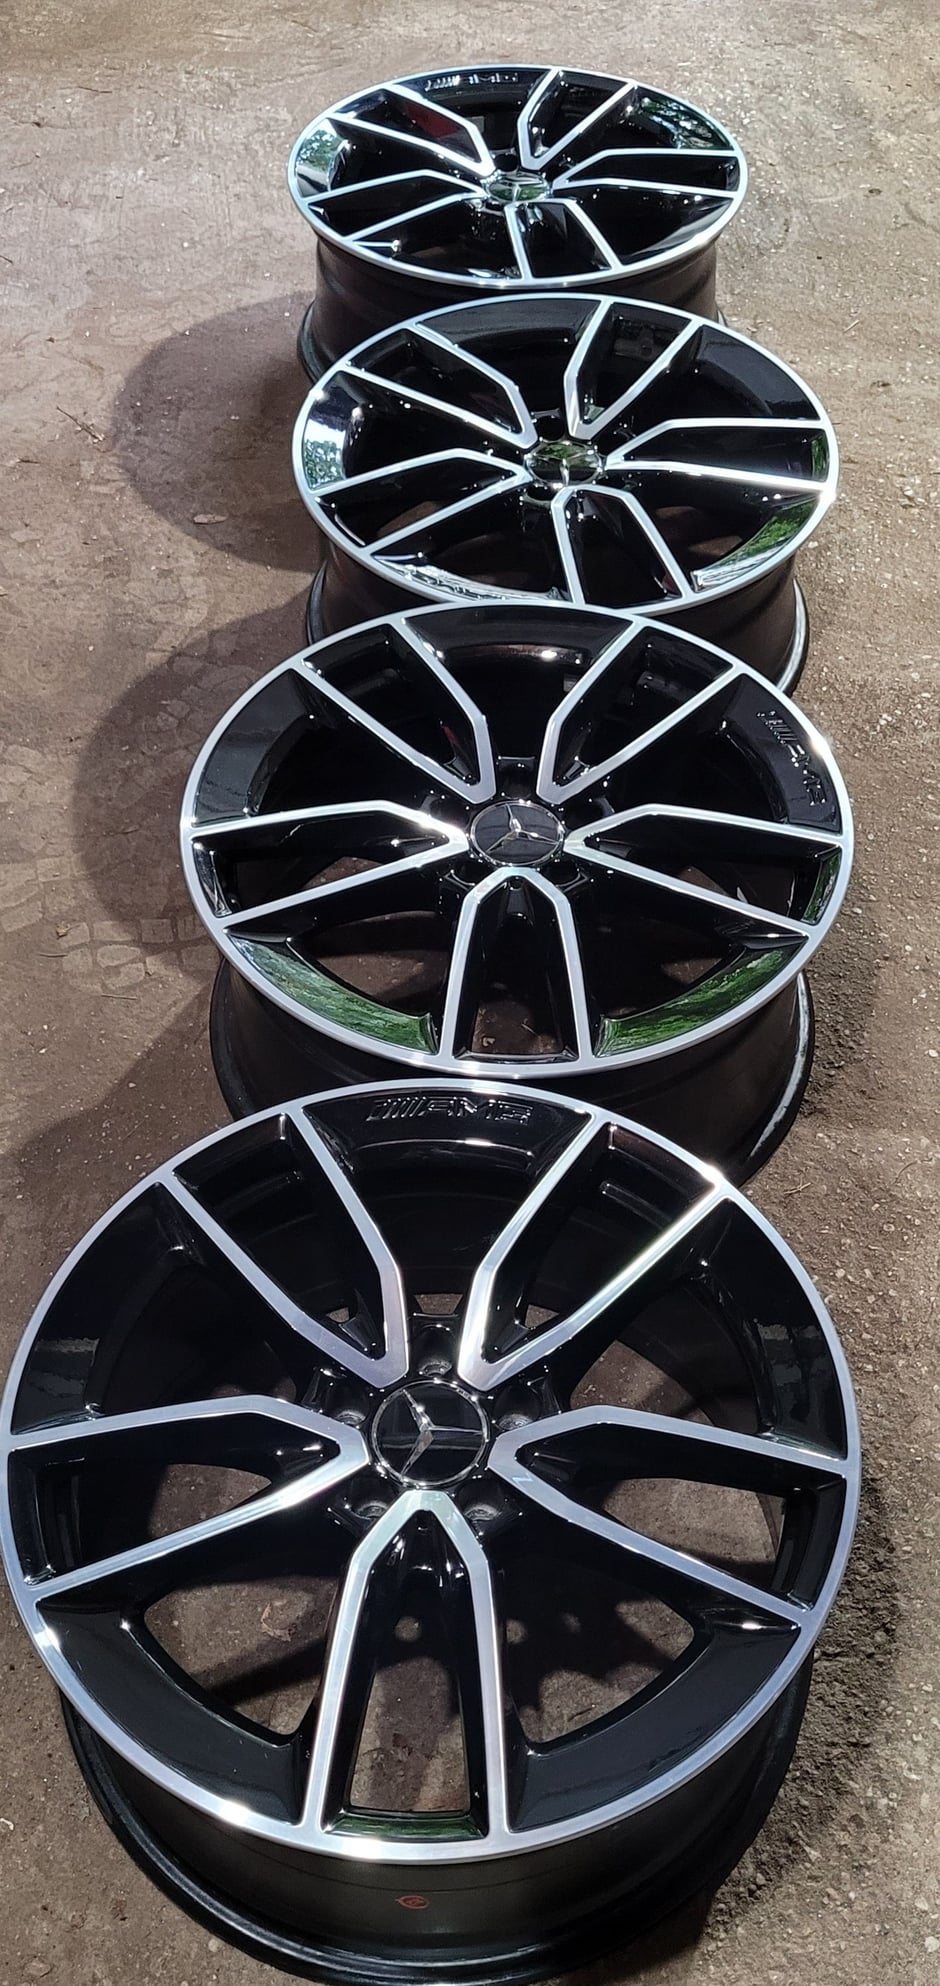 Wheels and Tires/Axles - C43 facelift wheels and tires - Used - 2016 to 2022 Mercedes-Benz C43 AMG - Westchester, NY 10583, United States